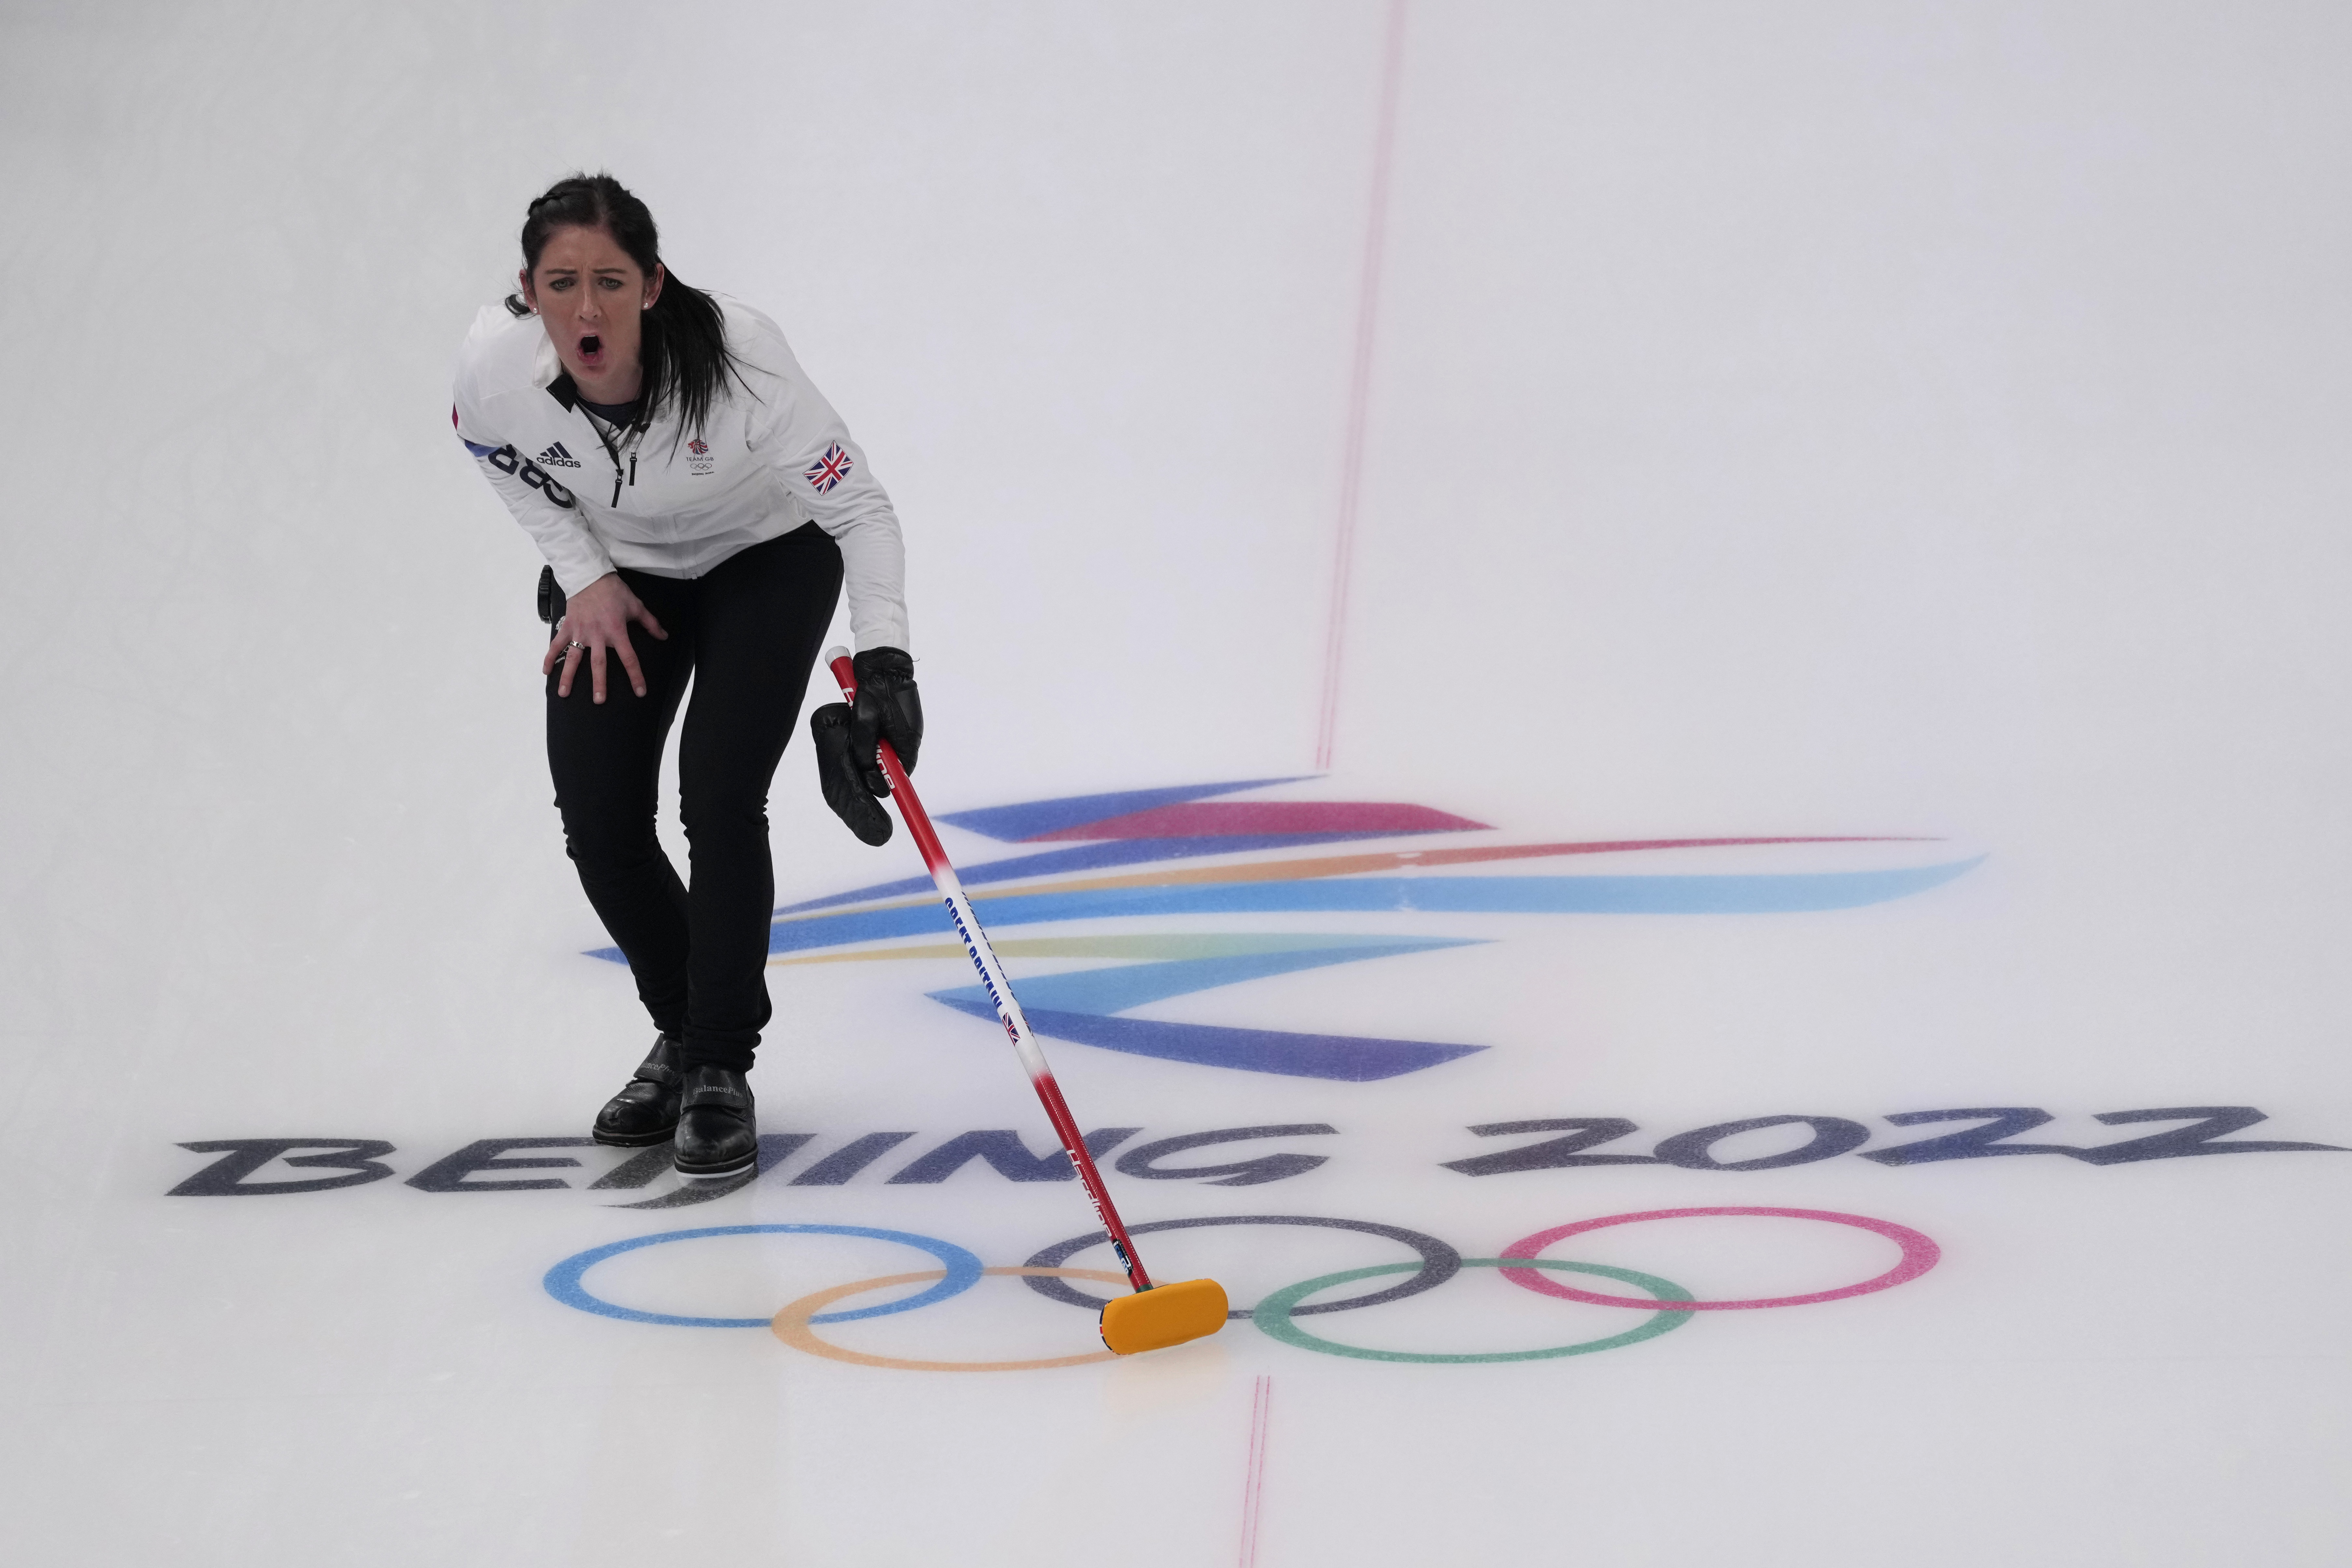 womens curling live streaming